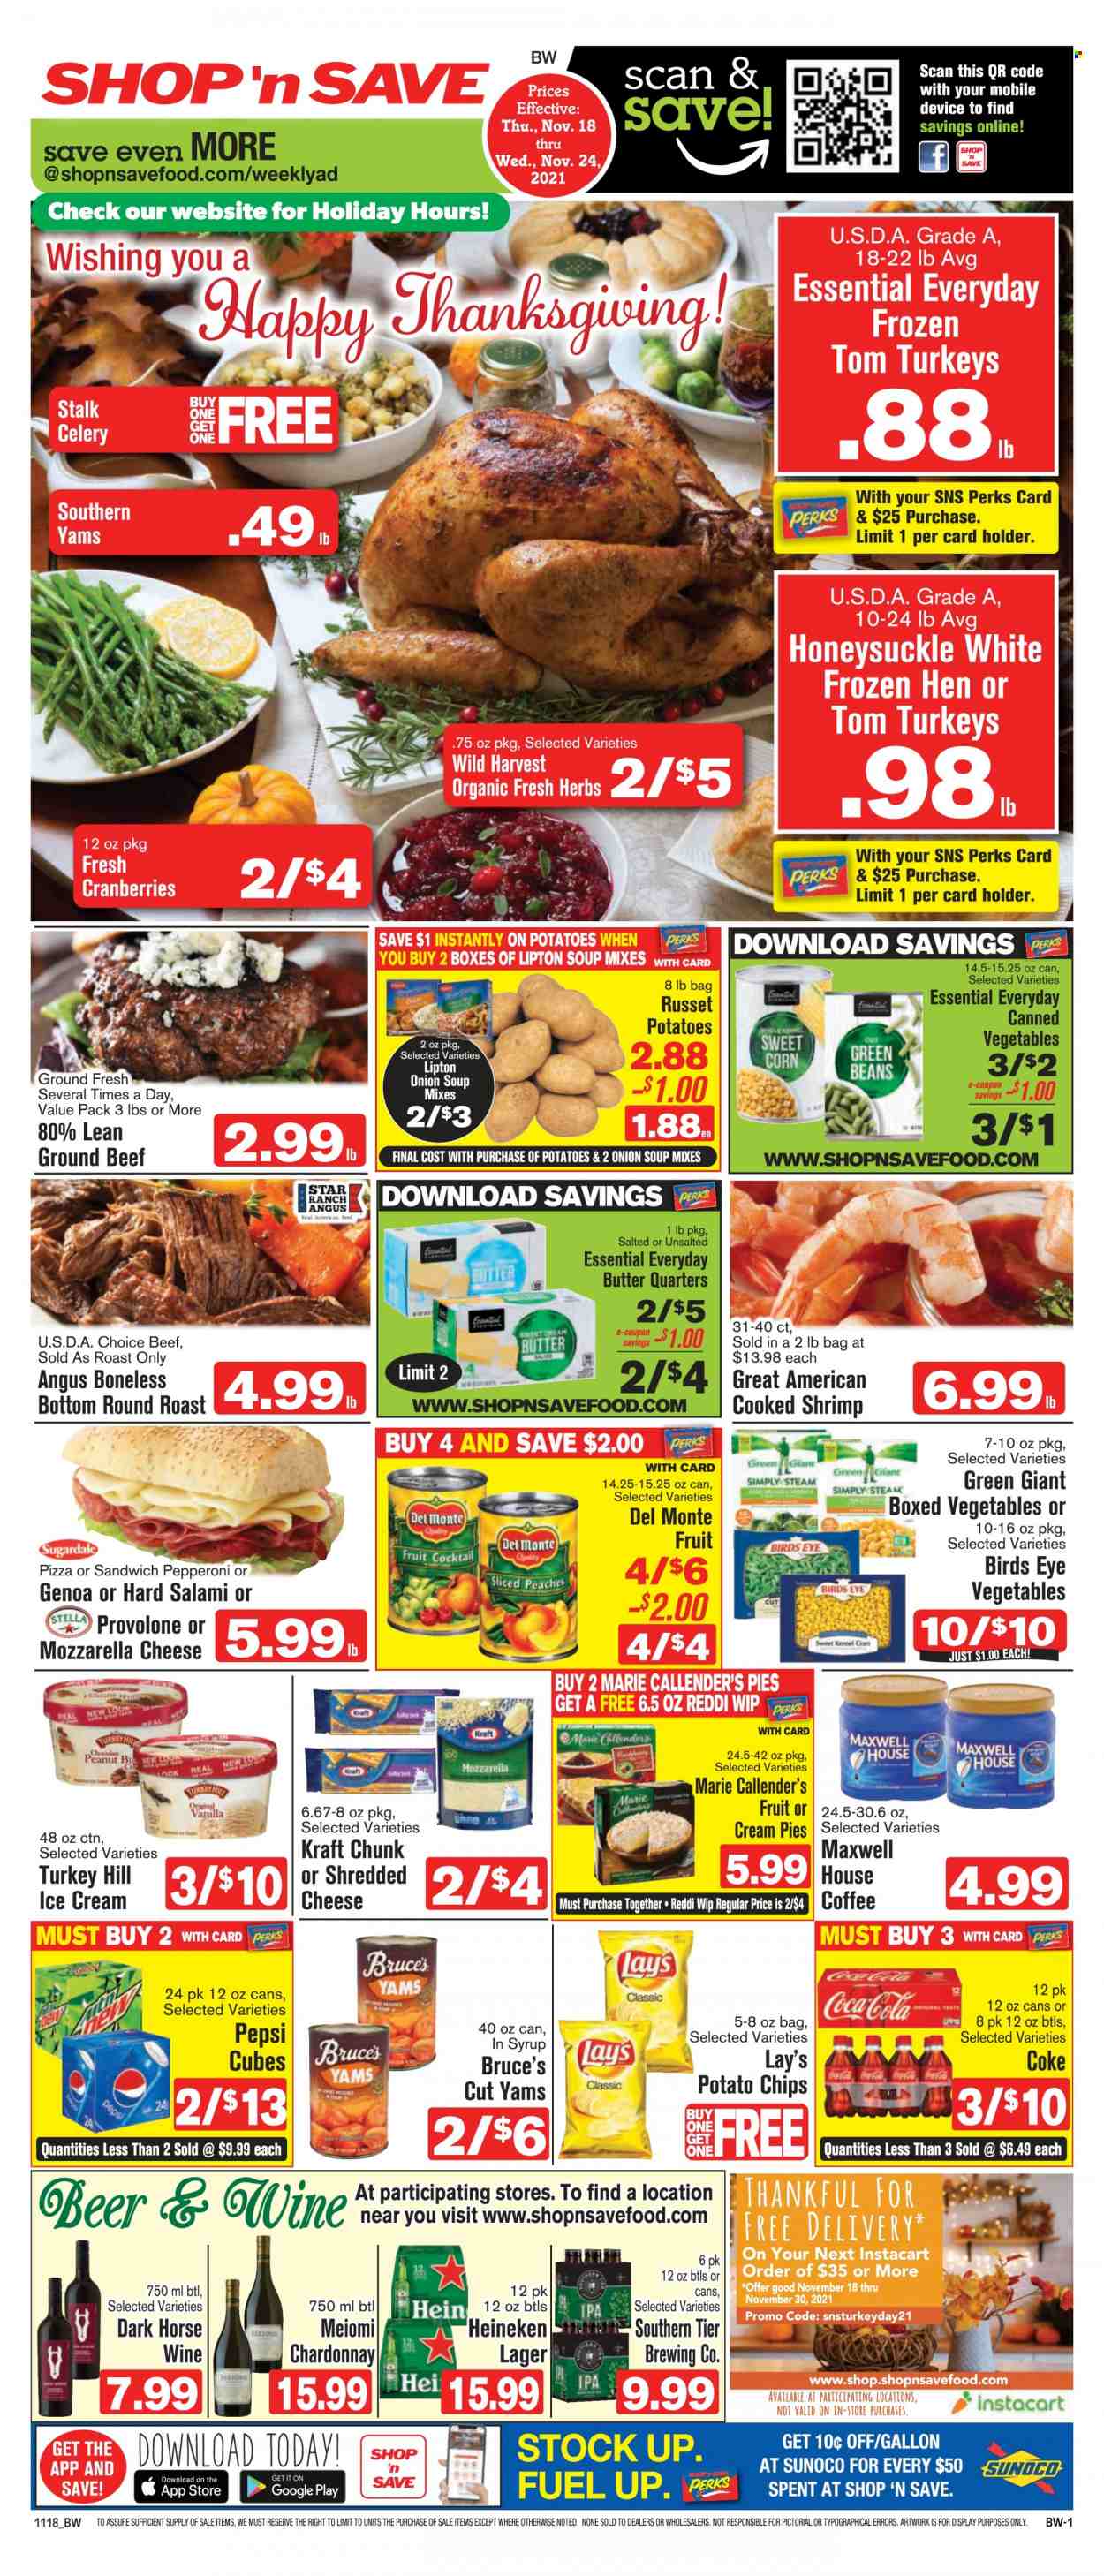 thumbnail - Shop ‘n Save Flyer - 11/18/2021 - 11/24/2021 - Sales products - cream pie, celery, corn, green beans, russet potatoes, sweet corn, Wild Harvest, beef meat, ground beef, round roast, shrimps, pizza, onion soup, sandwich, soup, Bird's Eye, Marie Callender's, Kraft®, Sugardale, salami, pepperoni, shredded cheese, Provolone, butter, ice cream, potato chips, Lay’s, cranberries, canned vegetables, Coca-Cola, Pepsi, Lipton, Maxwell House, coffee, white wine, Chardonnay, wine, beer, Heineken, Lager, IPA, peaches. Page 1.